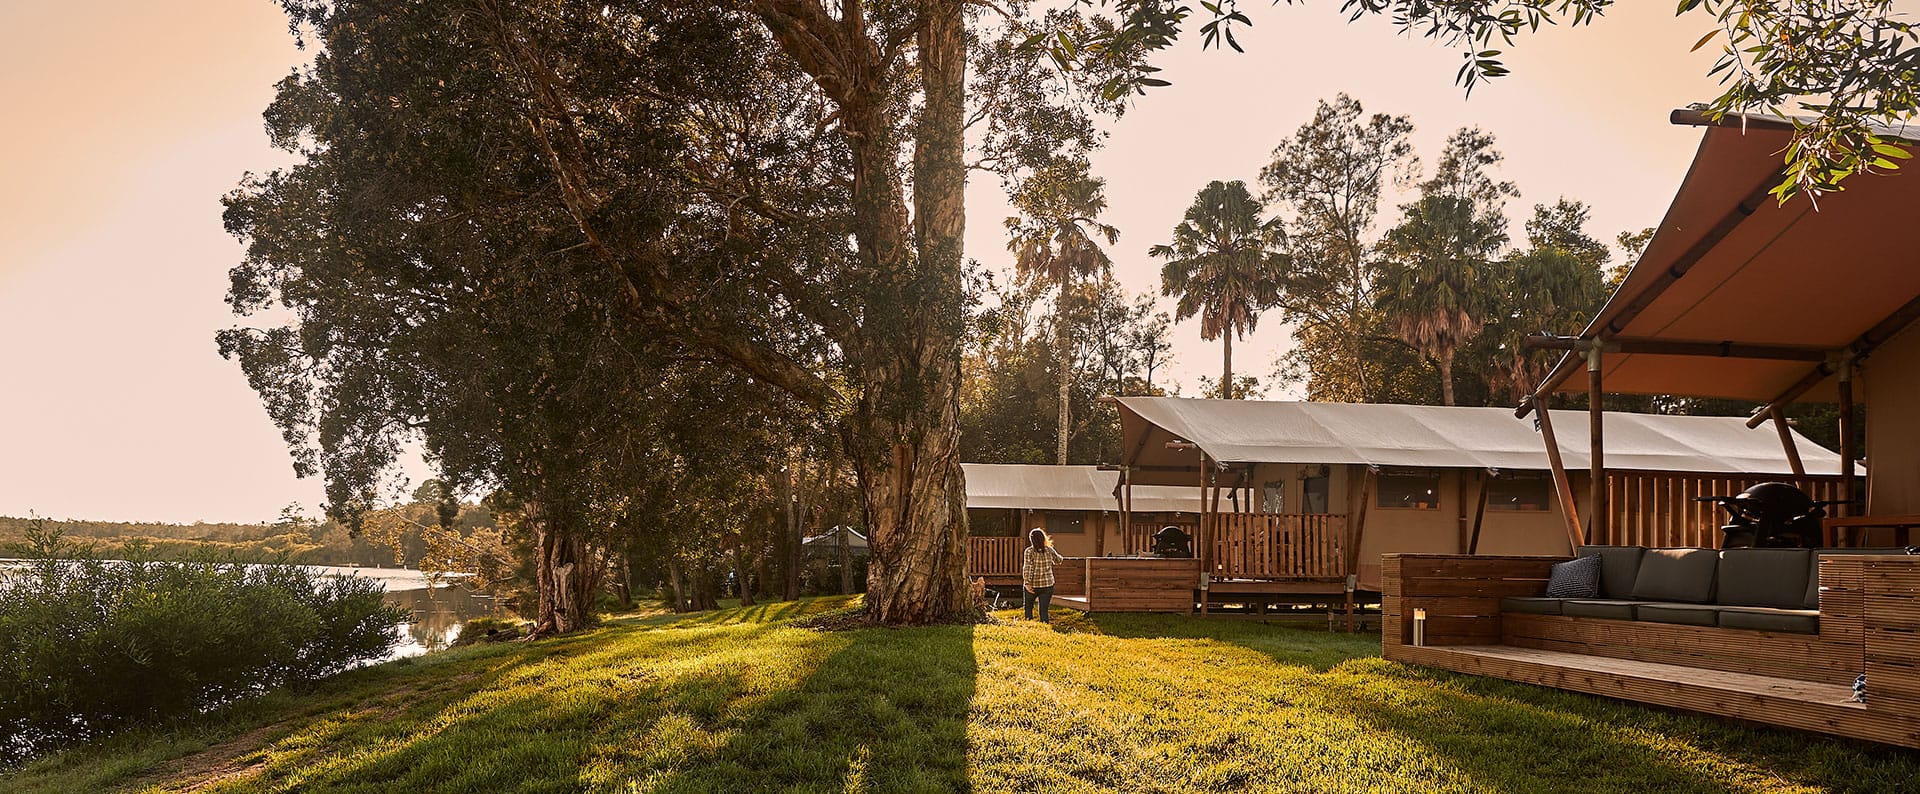 Myall River Camp Hawks Nest, luxury glamping experience nsw, safari-style glamping tents, riverfront location on the Myall River